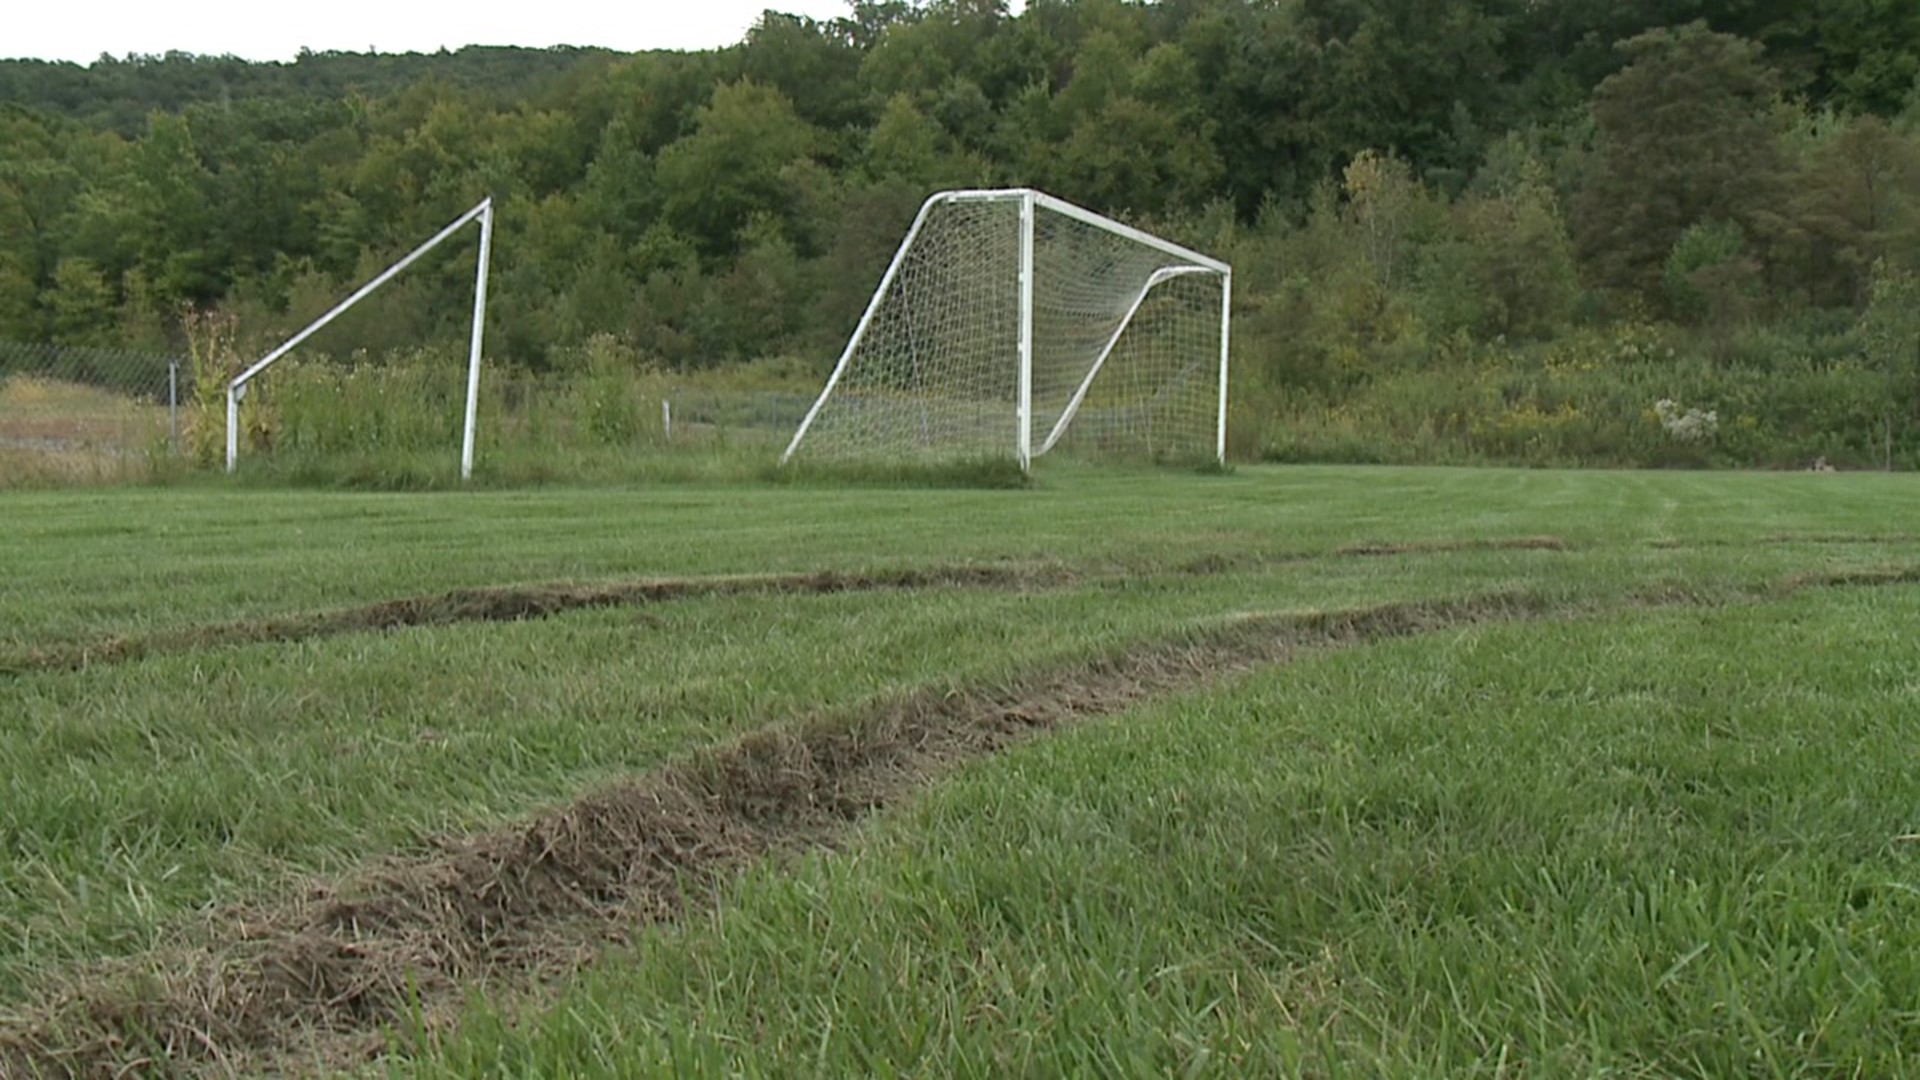 This isn't the first time ATVs have run through the soccer field in Hanover Township.